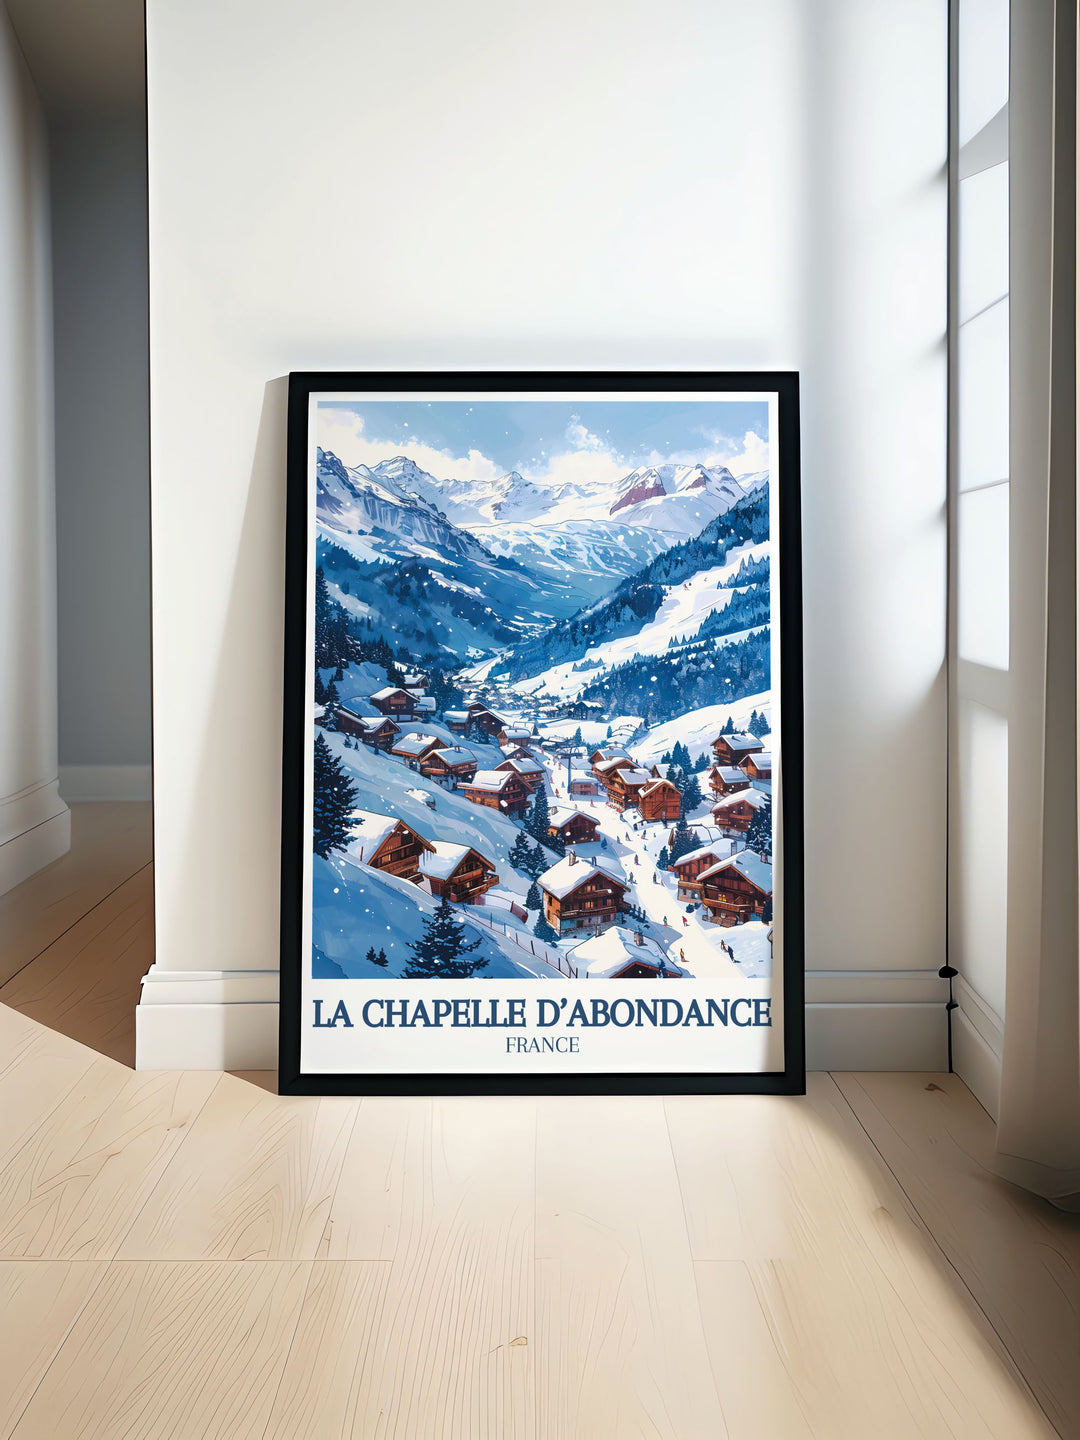 Beautiful Ski Resort Poster featuring Dents du midi and Val d Abondance perfect for those who love French Alps Print Vintage Ski Print and Retro Ski Poster this artwork is a must have addition to your Skiing Wall Art collection